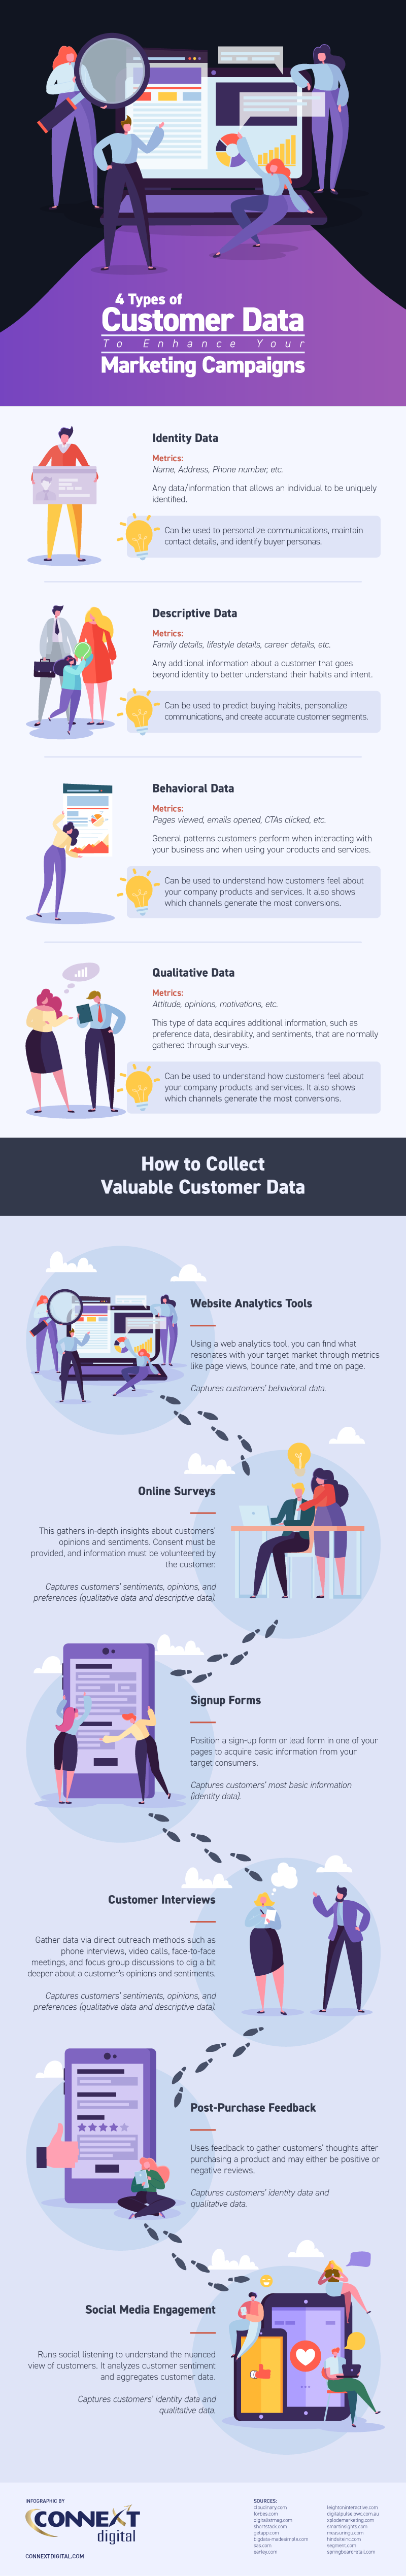 infographic created by ConnextDigital  about the 4 types of customer data and how you can (responsibly) mine each